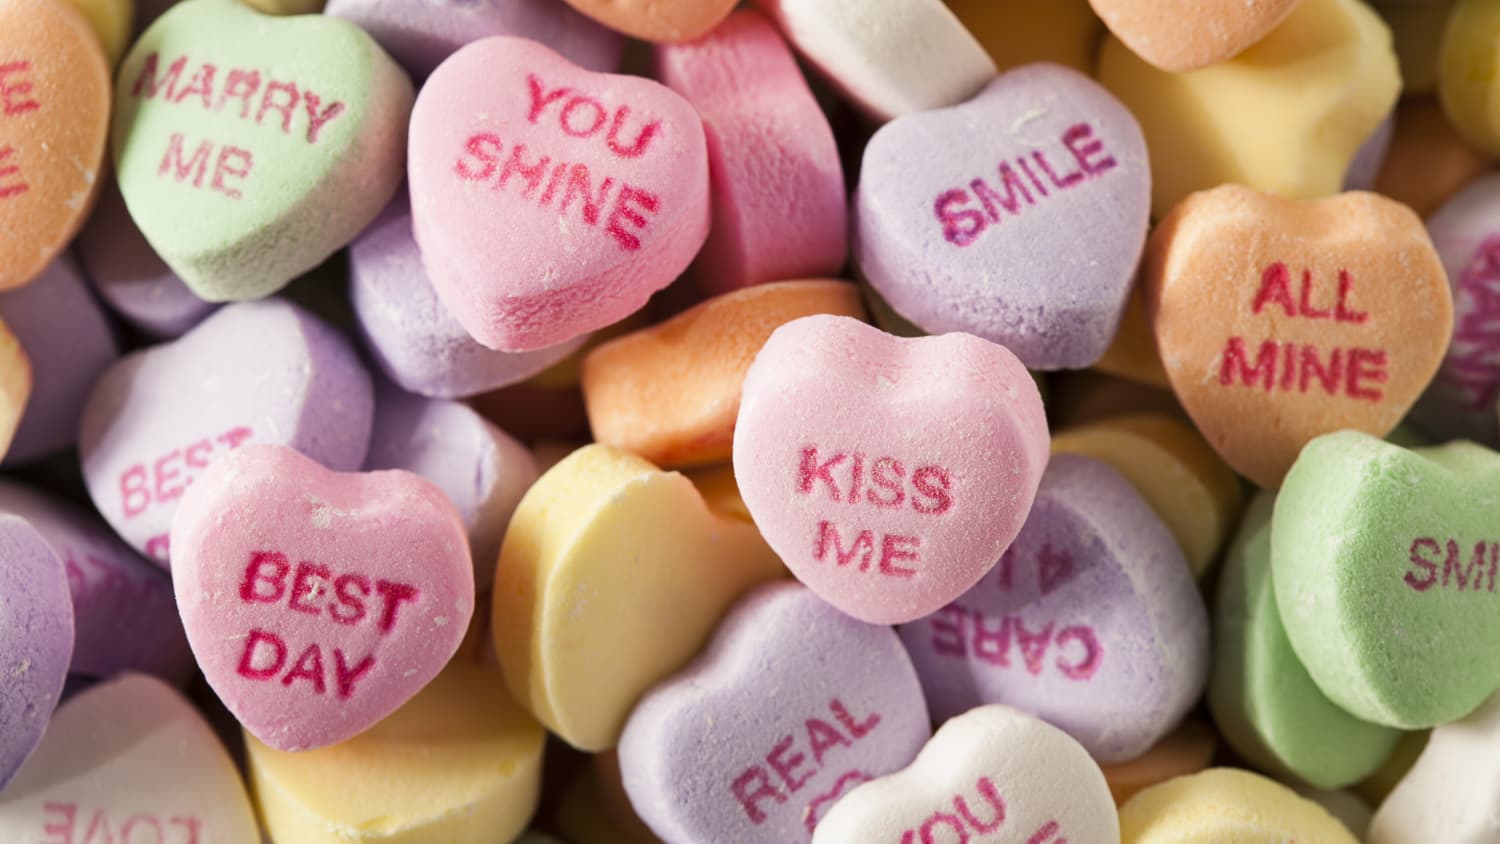 Valentine's Sweethearts Candies Return With Some New Changes